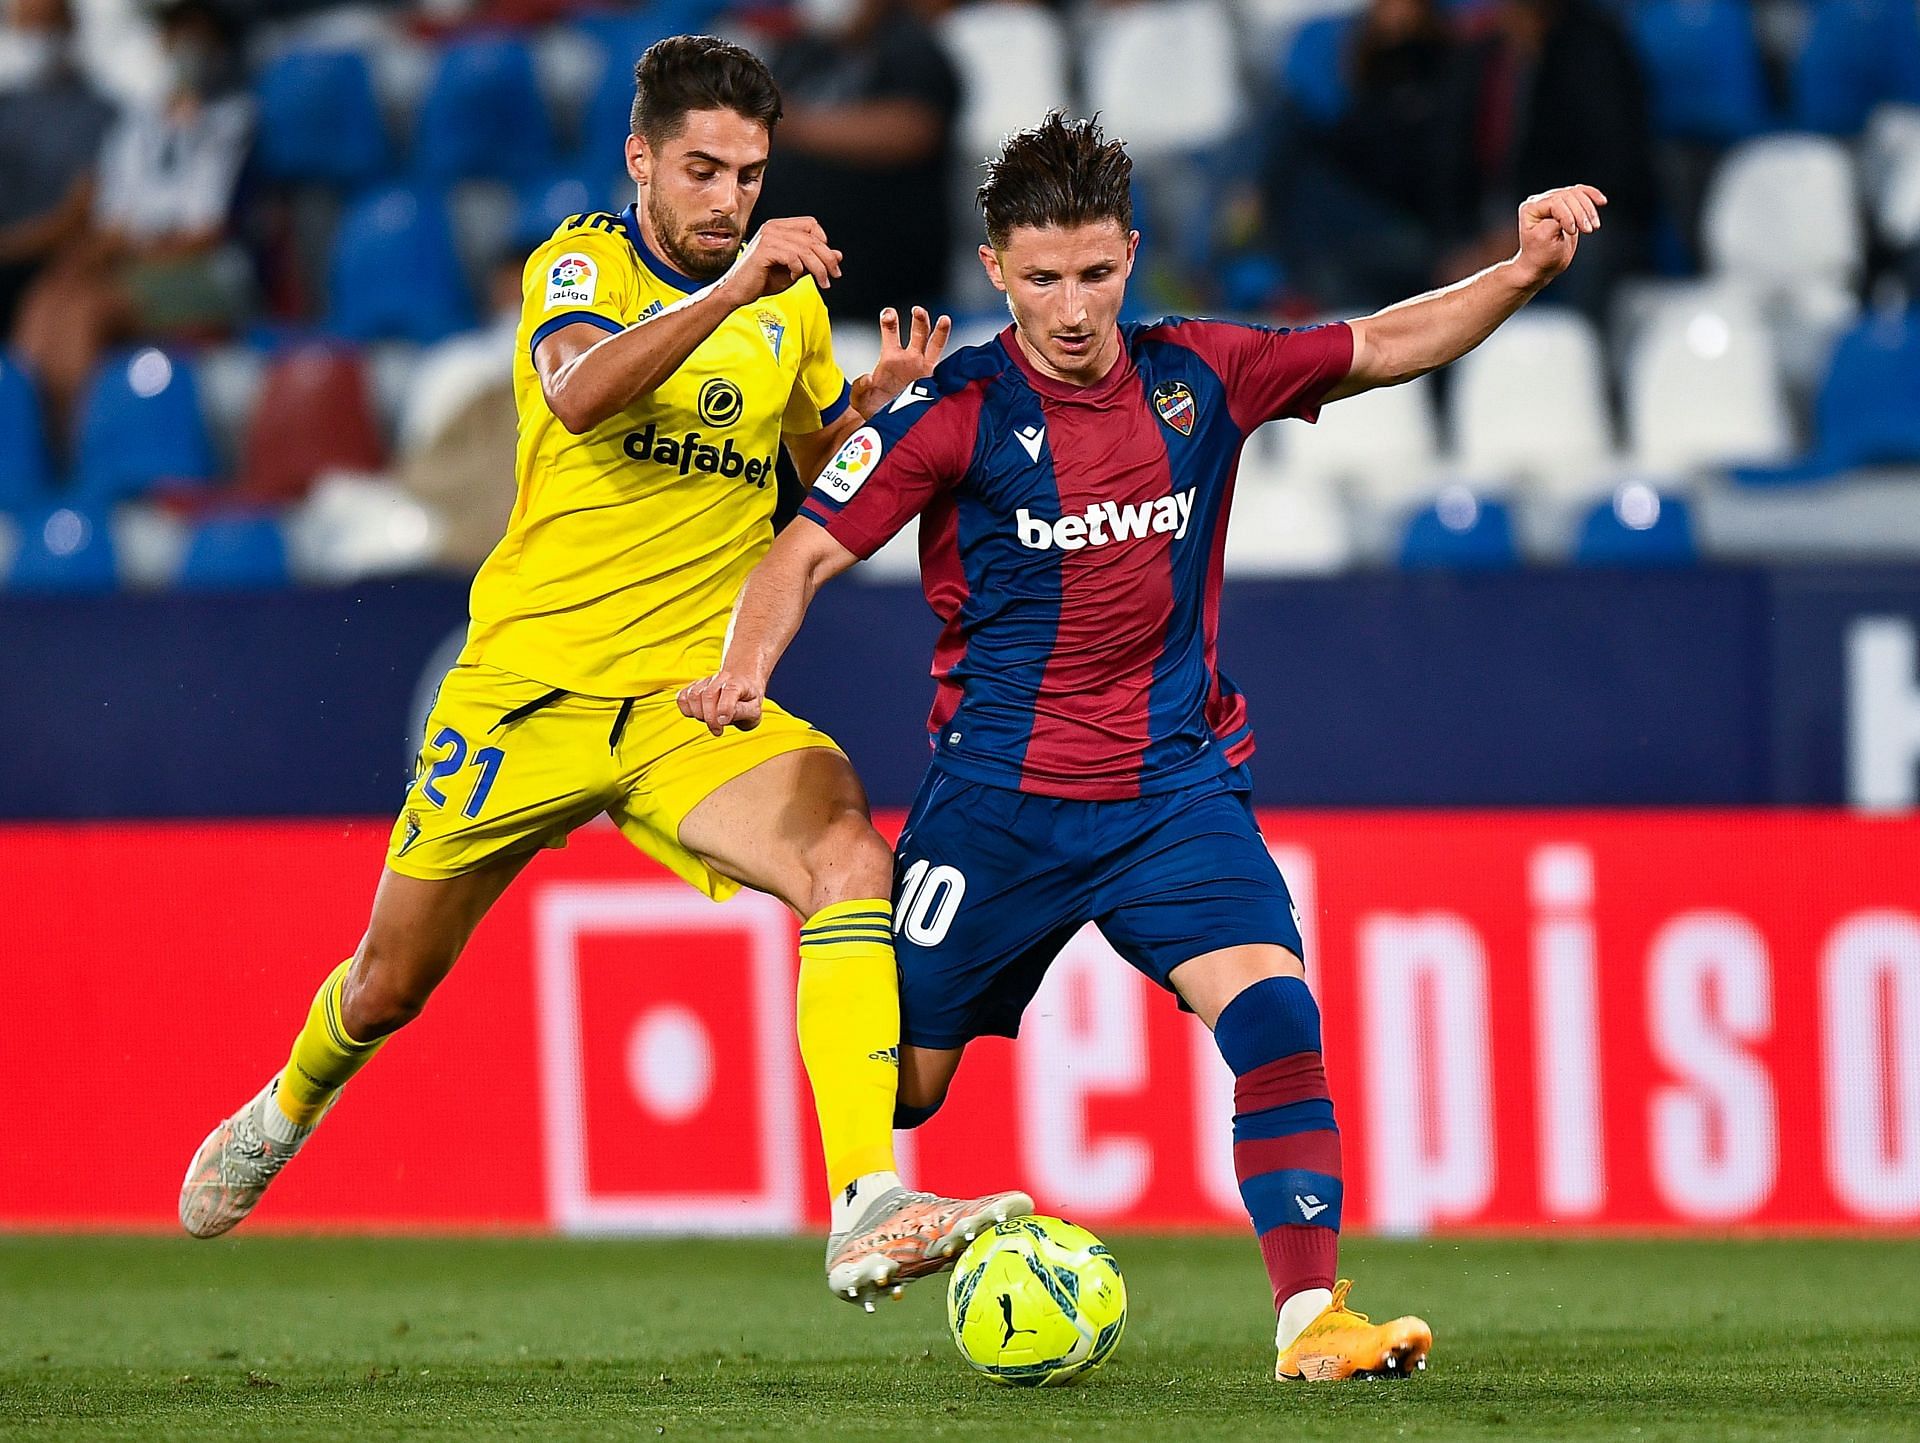 Bardhi will be a huge miss for Levante